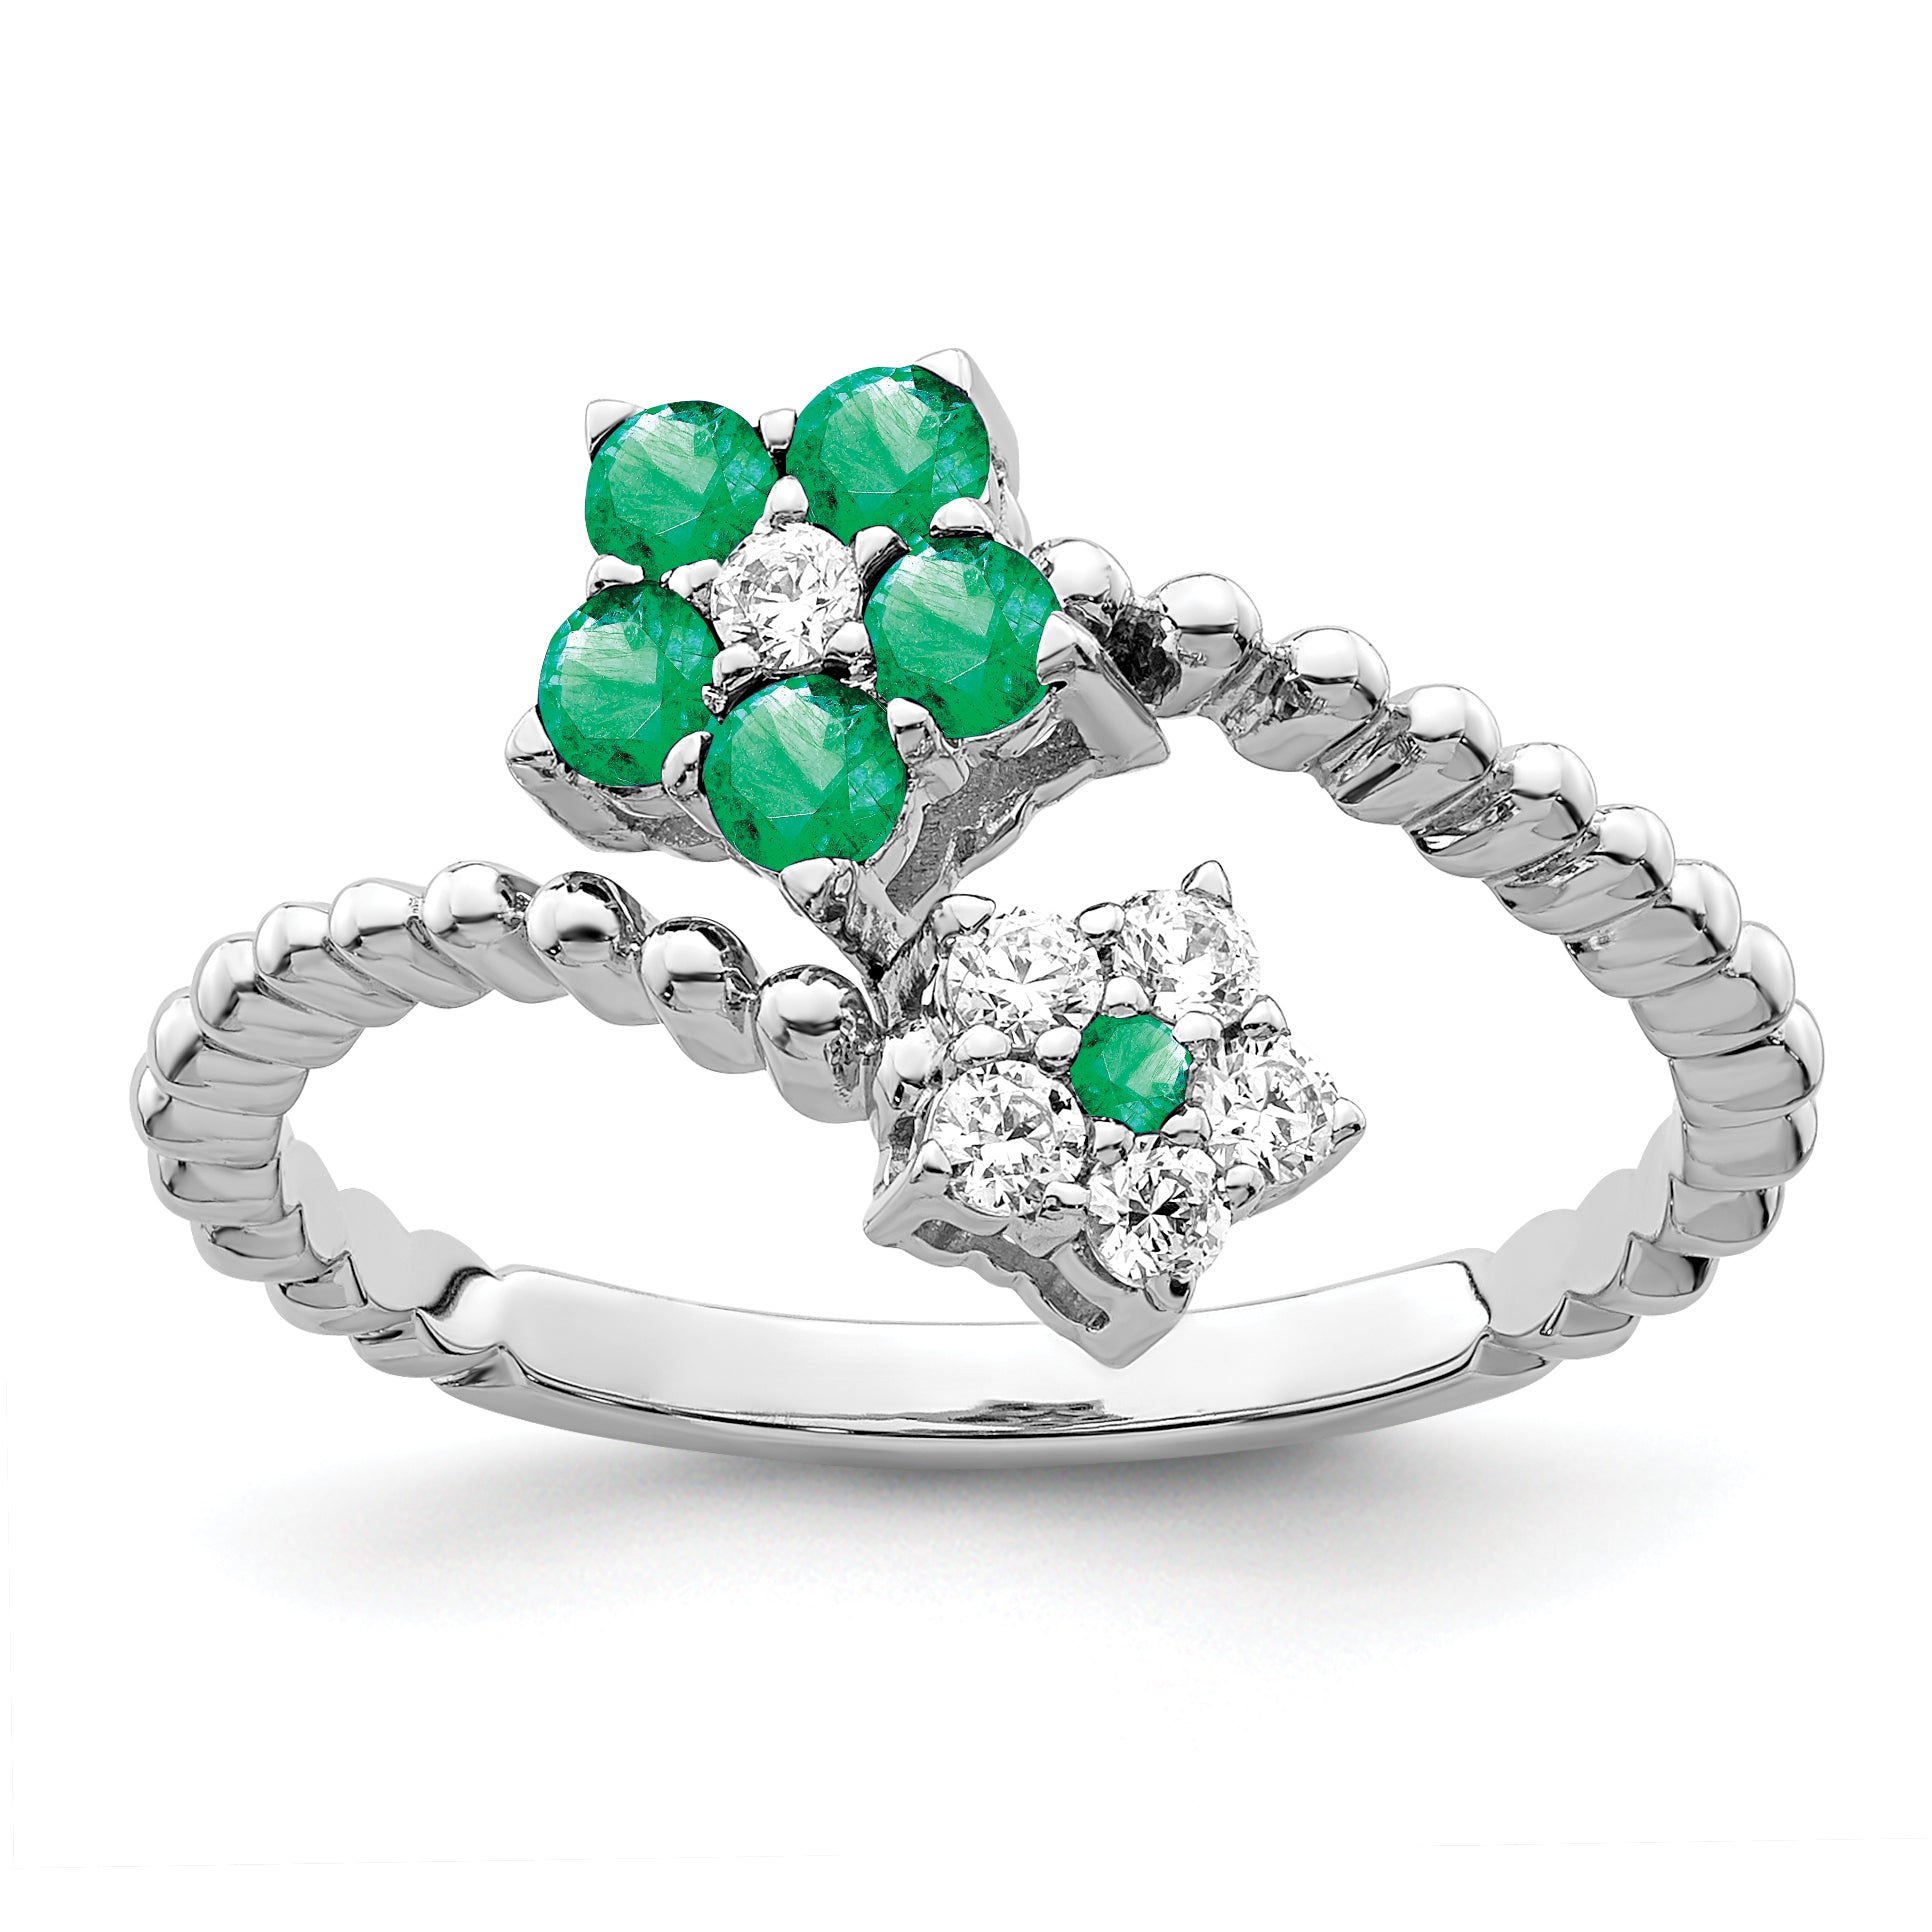 14k White Gold Polished Emerald and Diamond Floral Ring